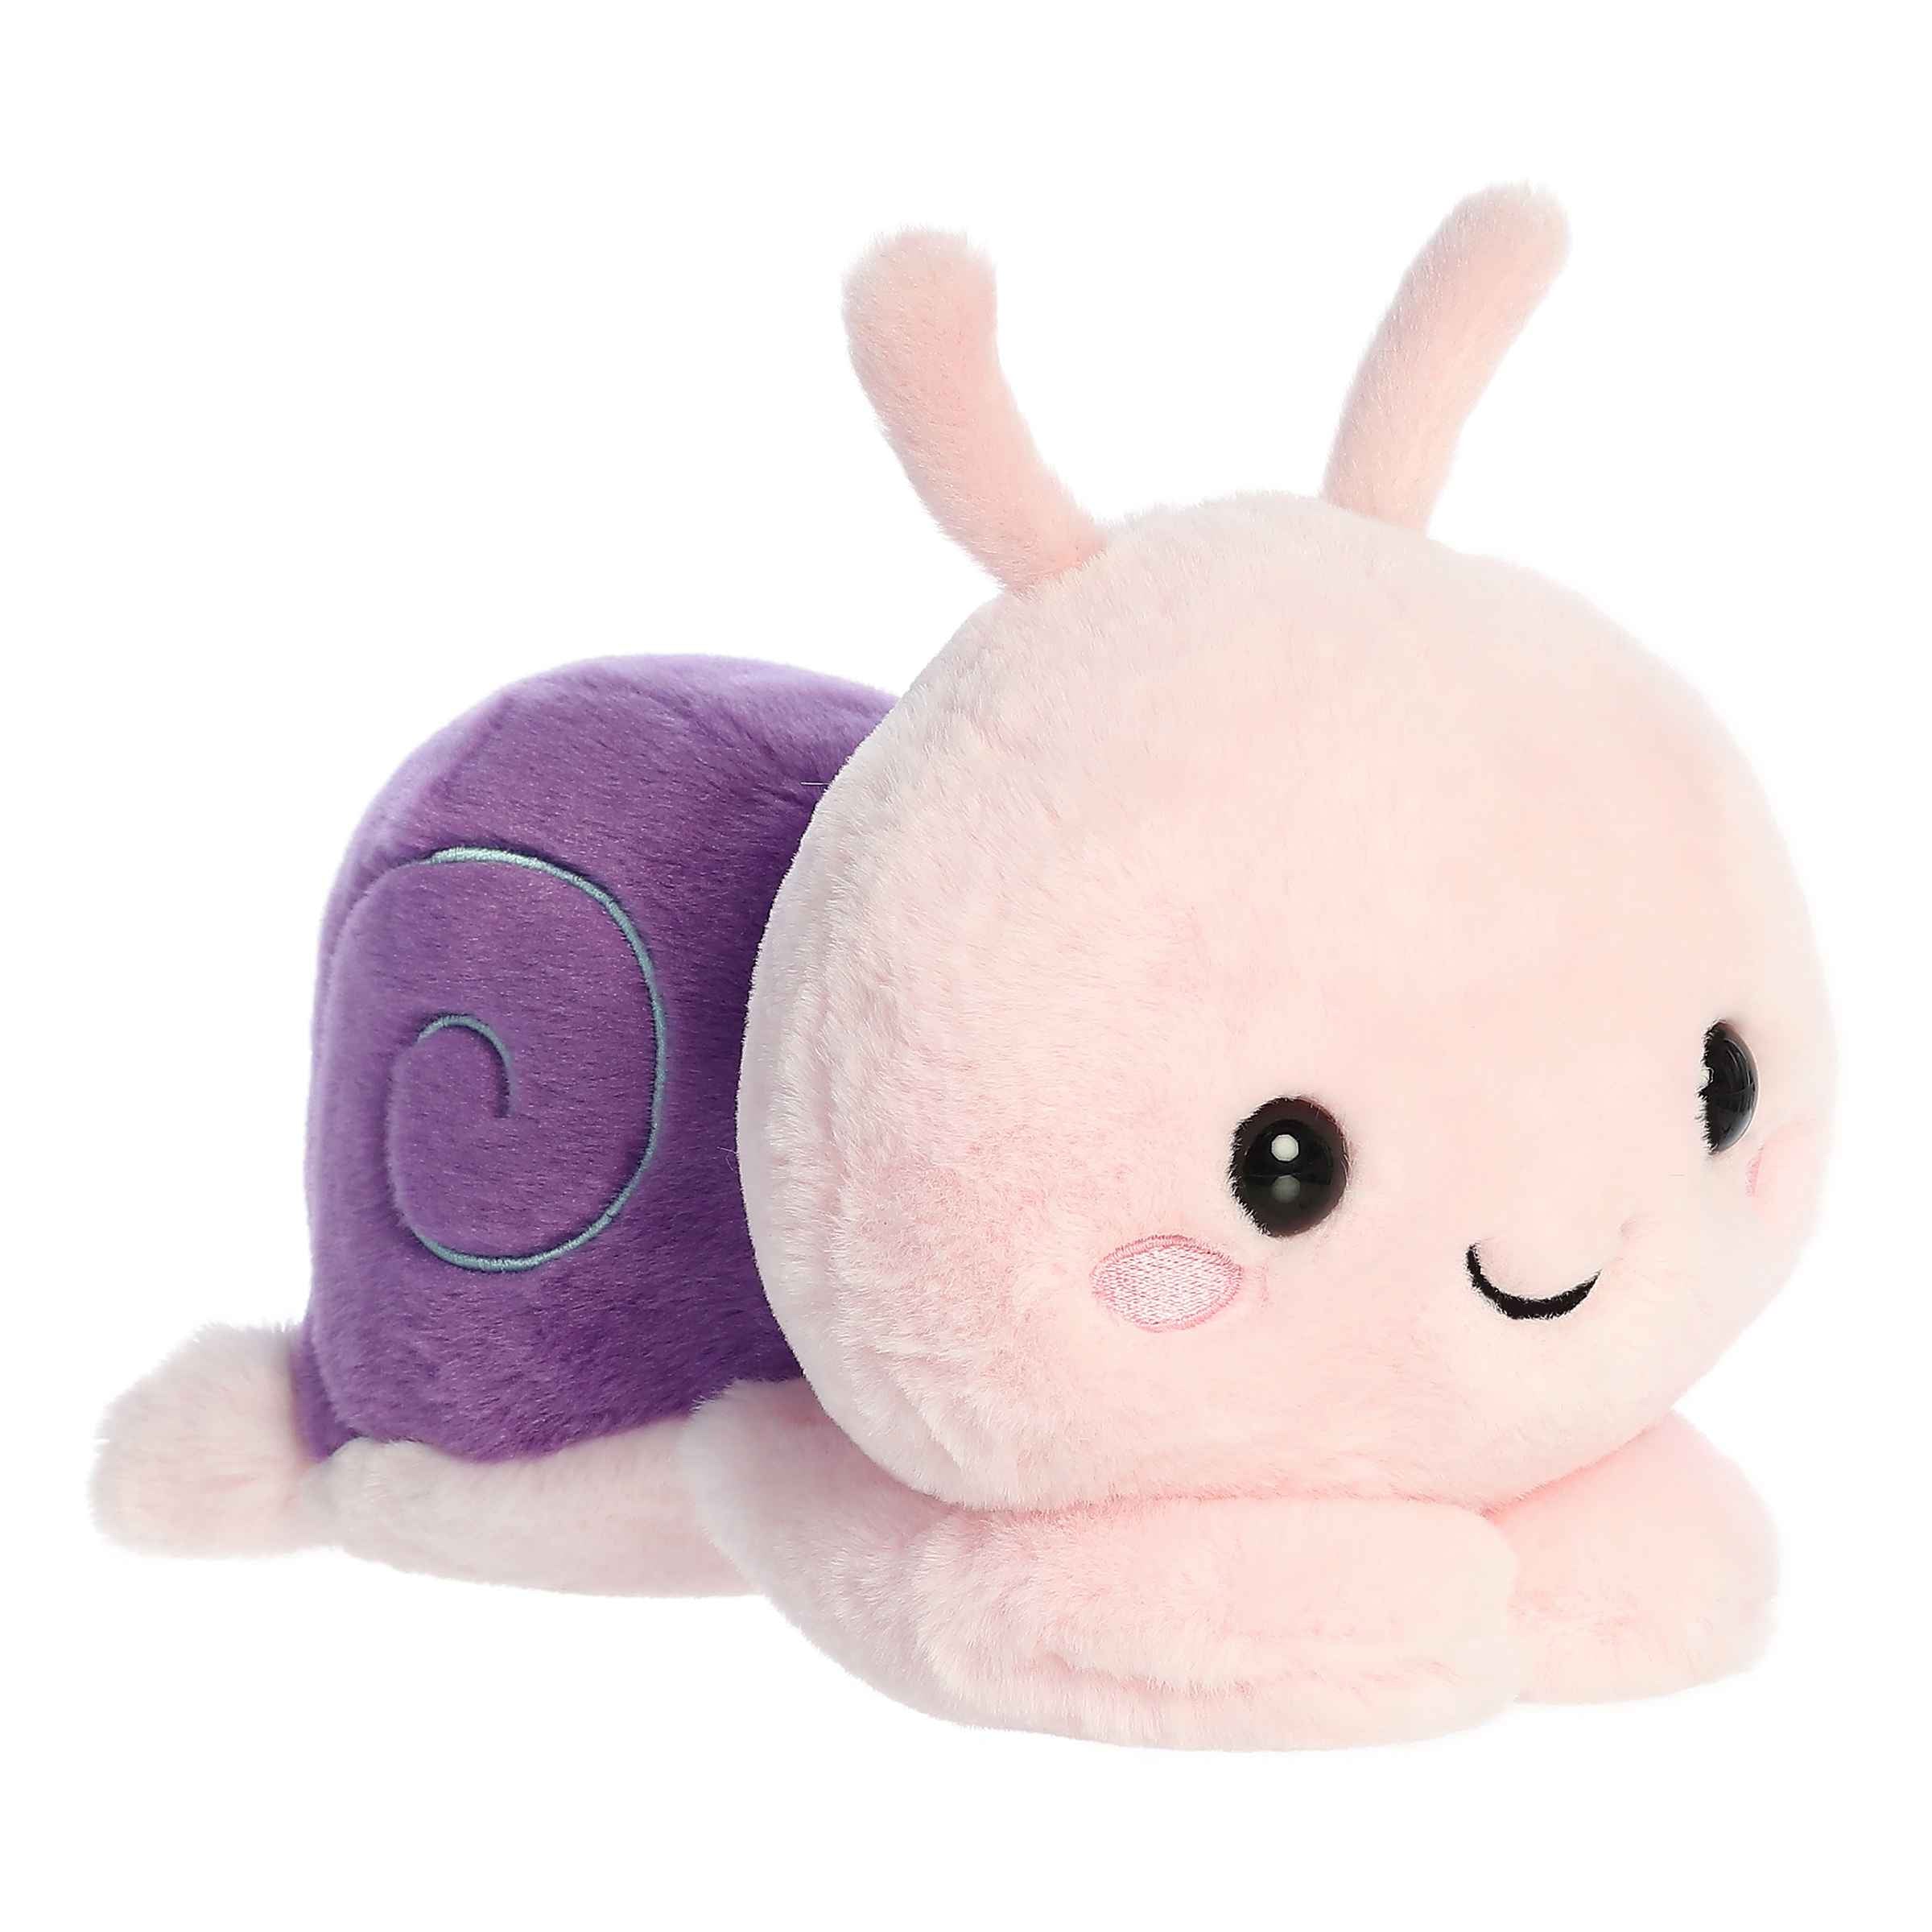 Sena Sea Snail plush from Too Cute Collection, plush pink shell, soft lavender body